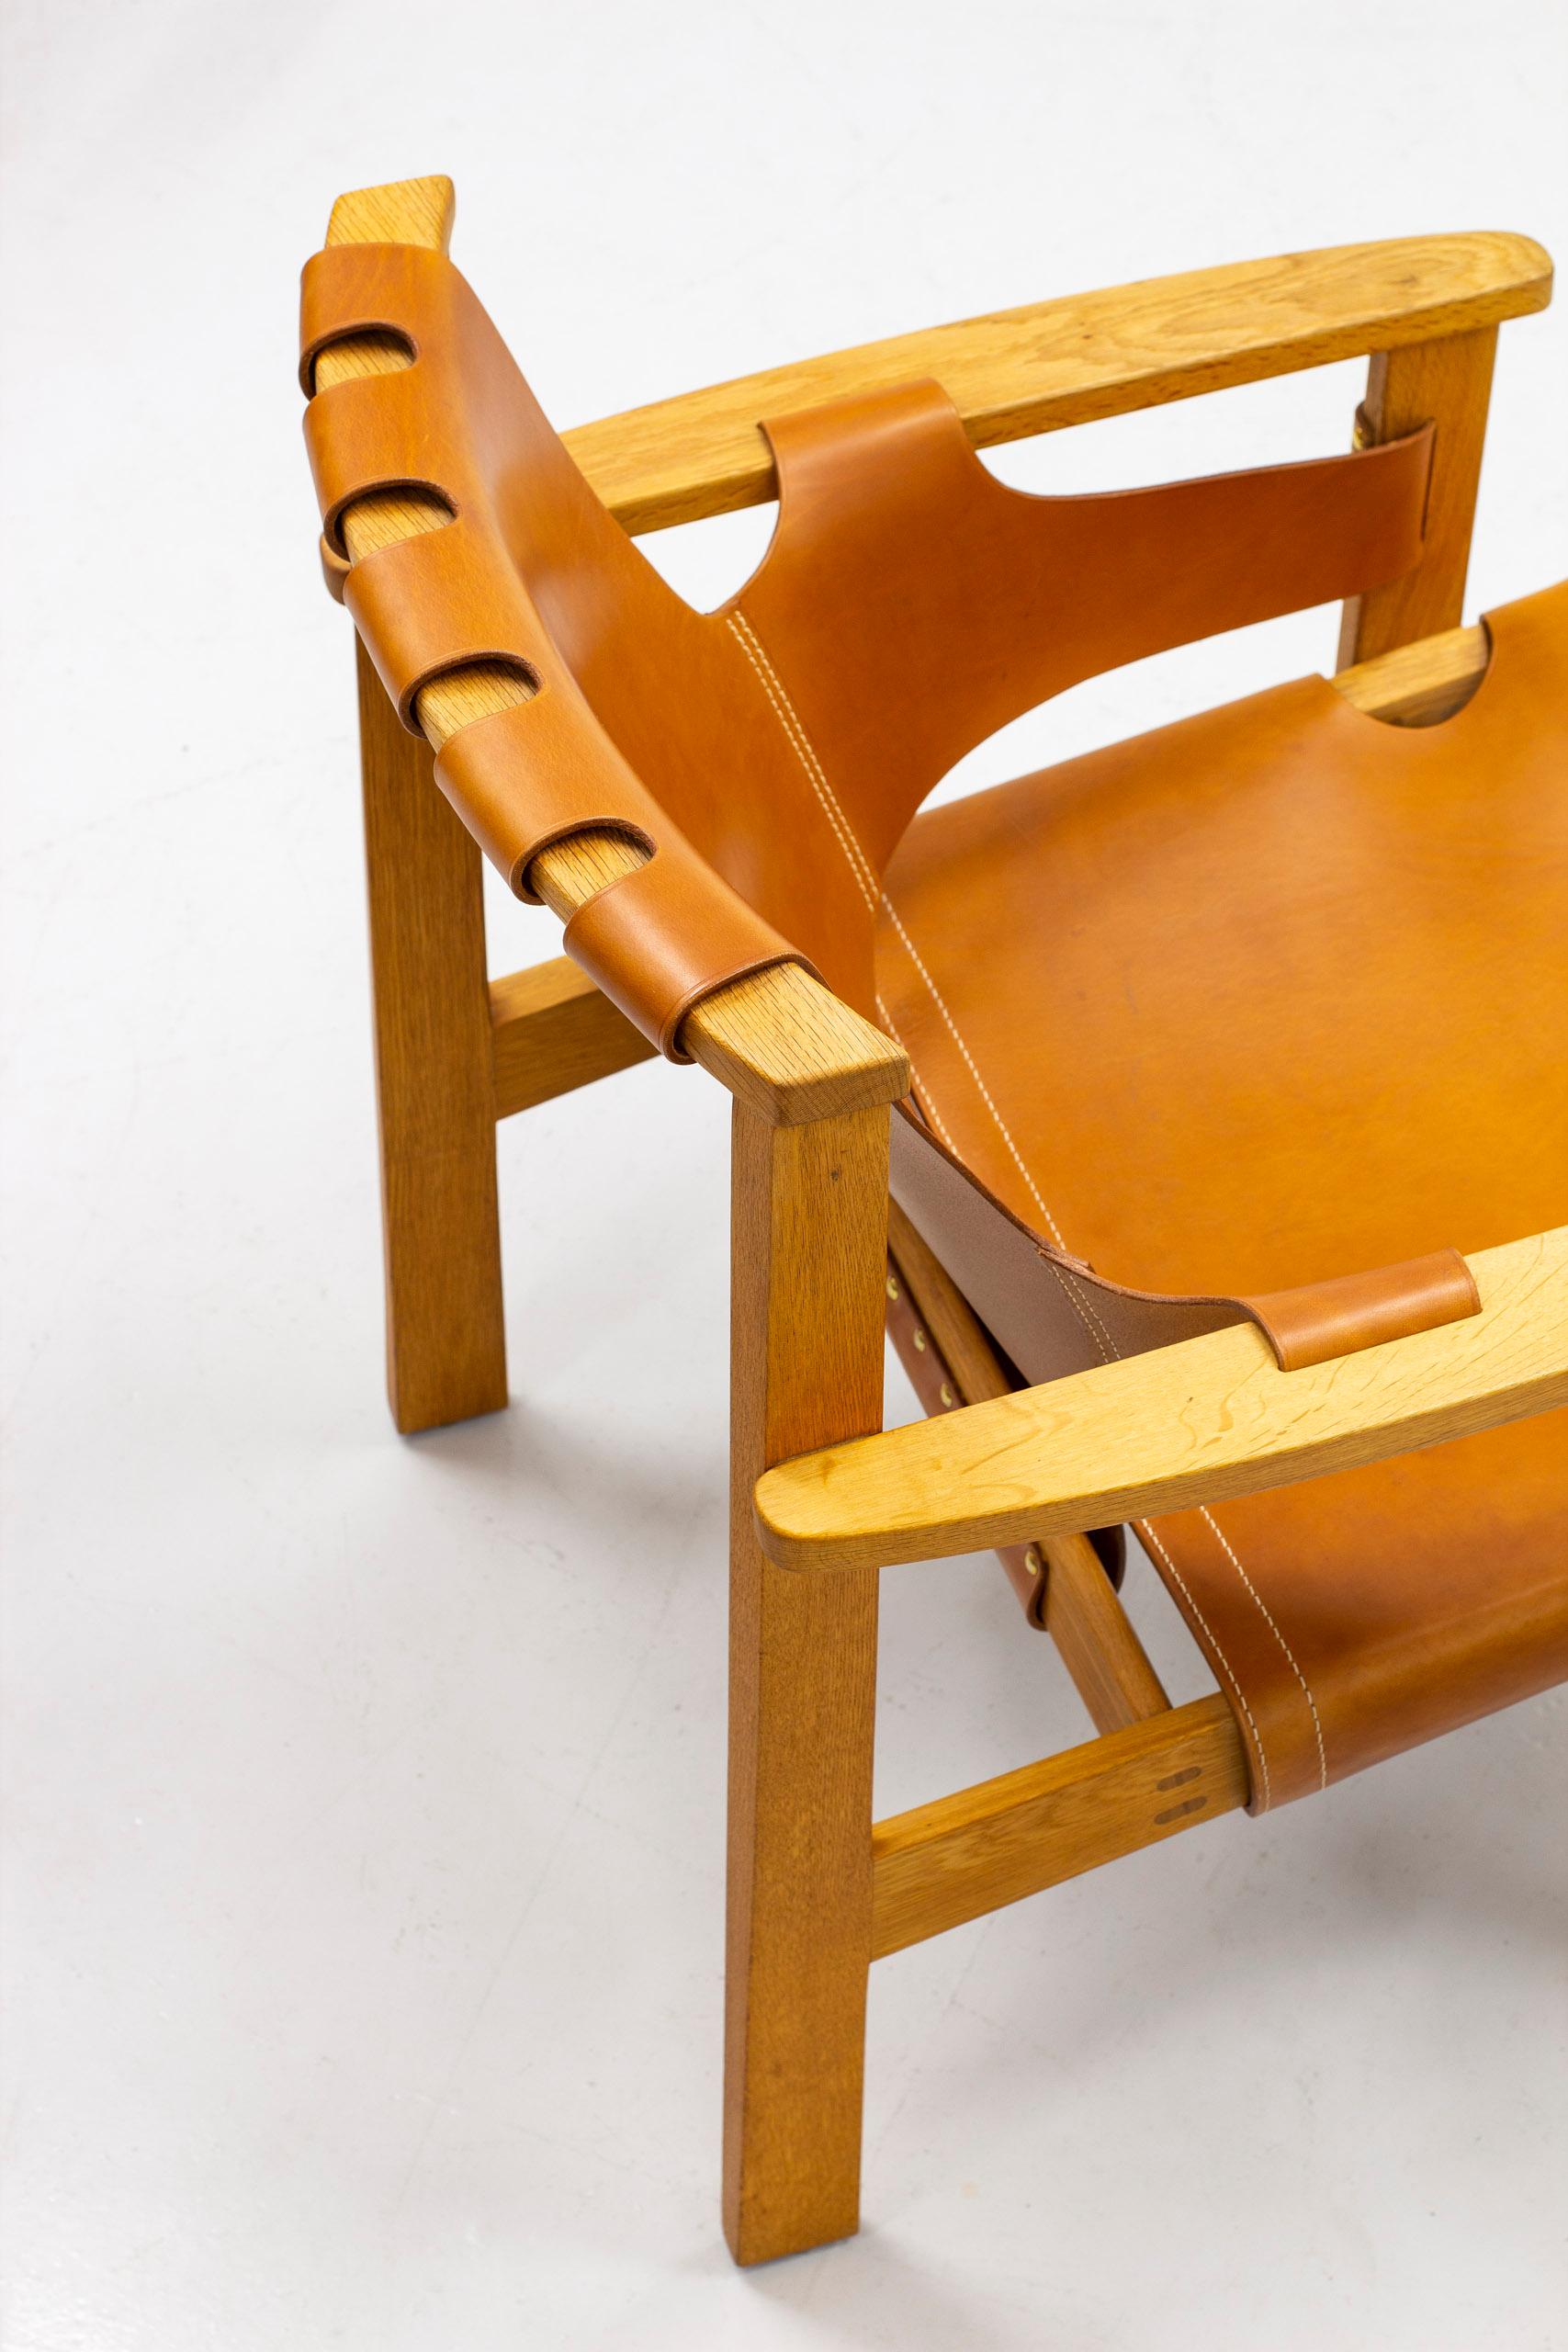 Brass Lounge Chairs in Oak and Leather by Carl-Axel Acking, Nk, Nordiska Kompaniet